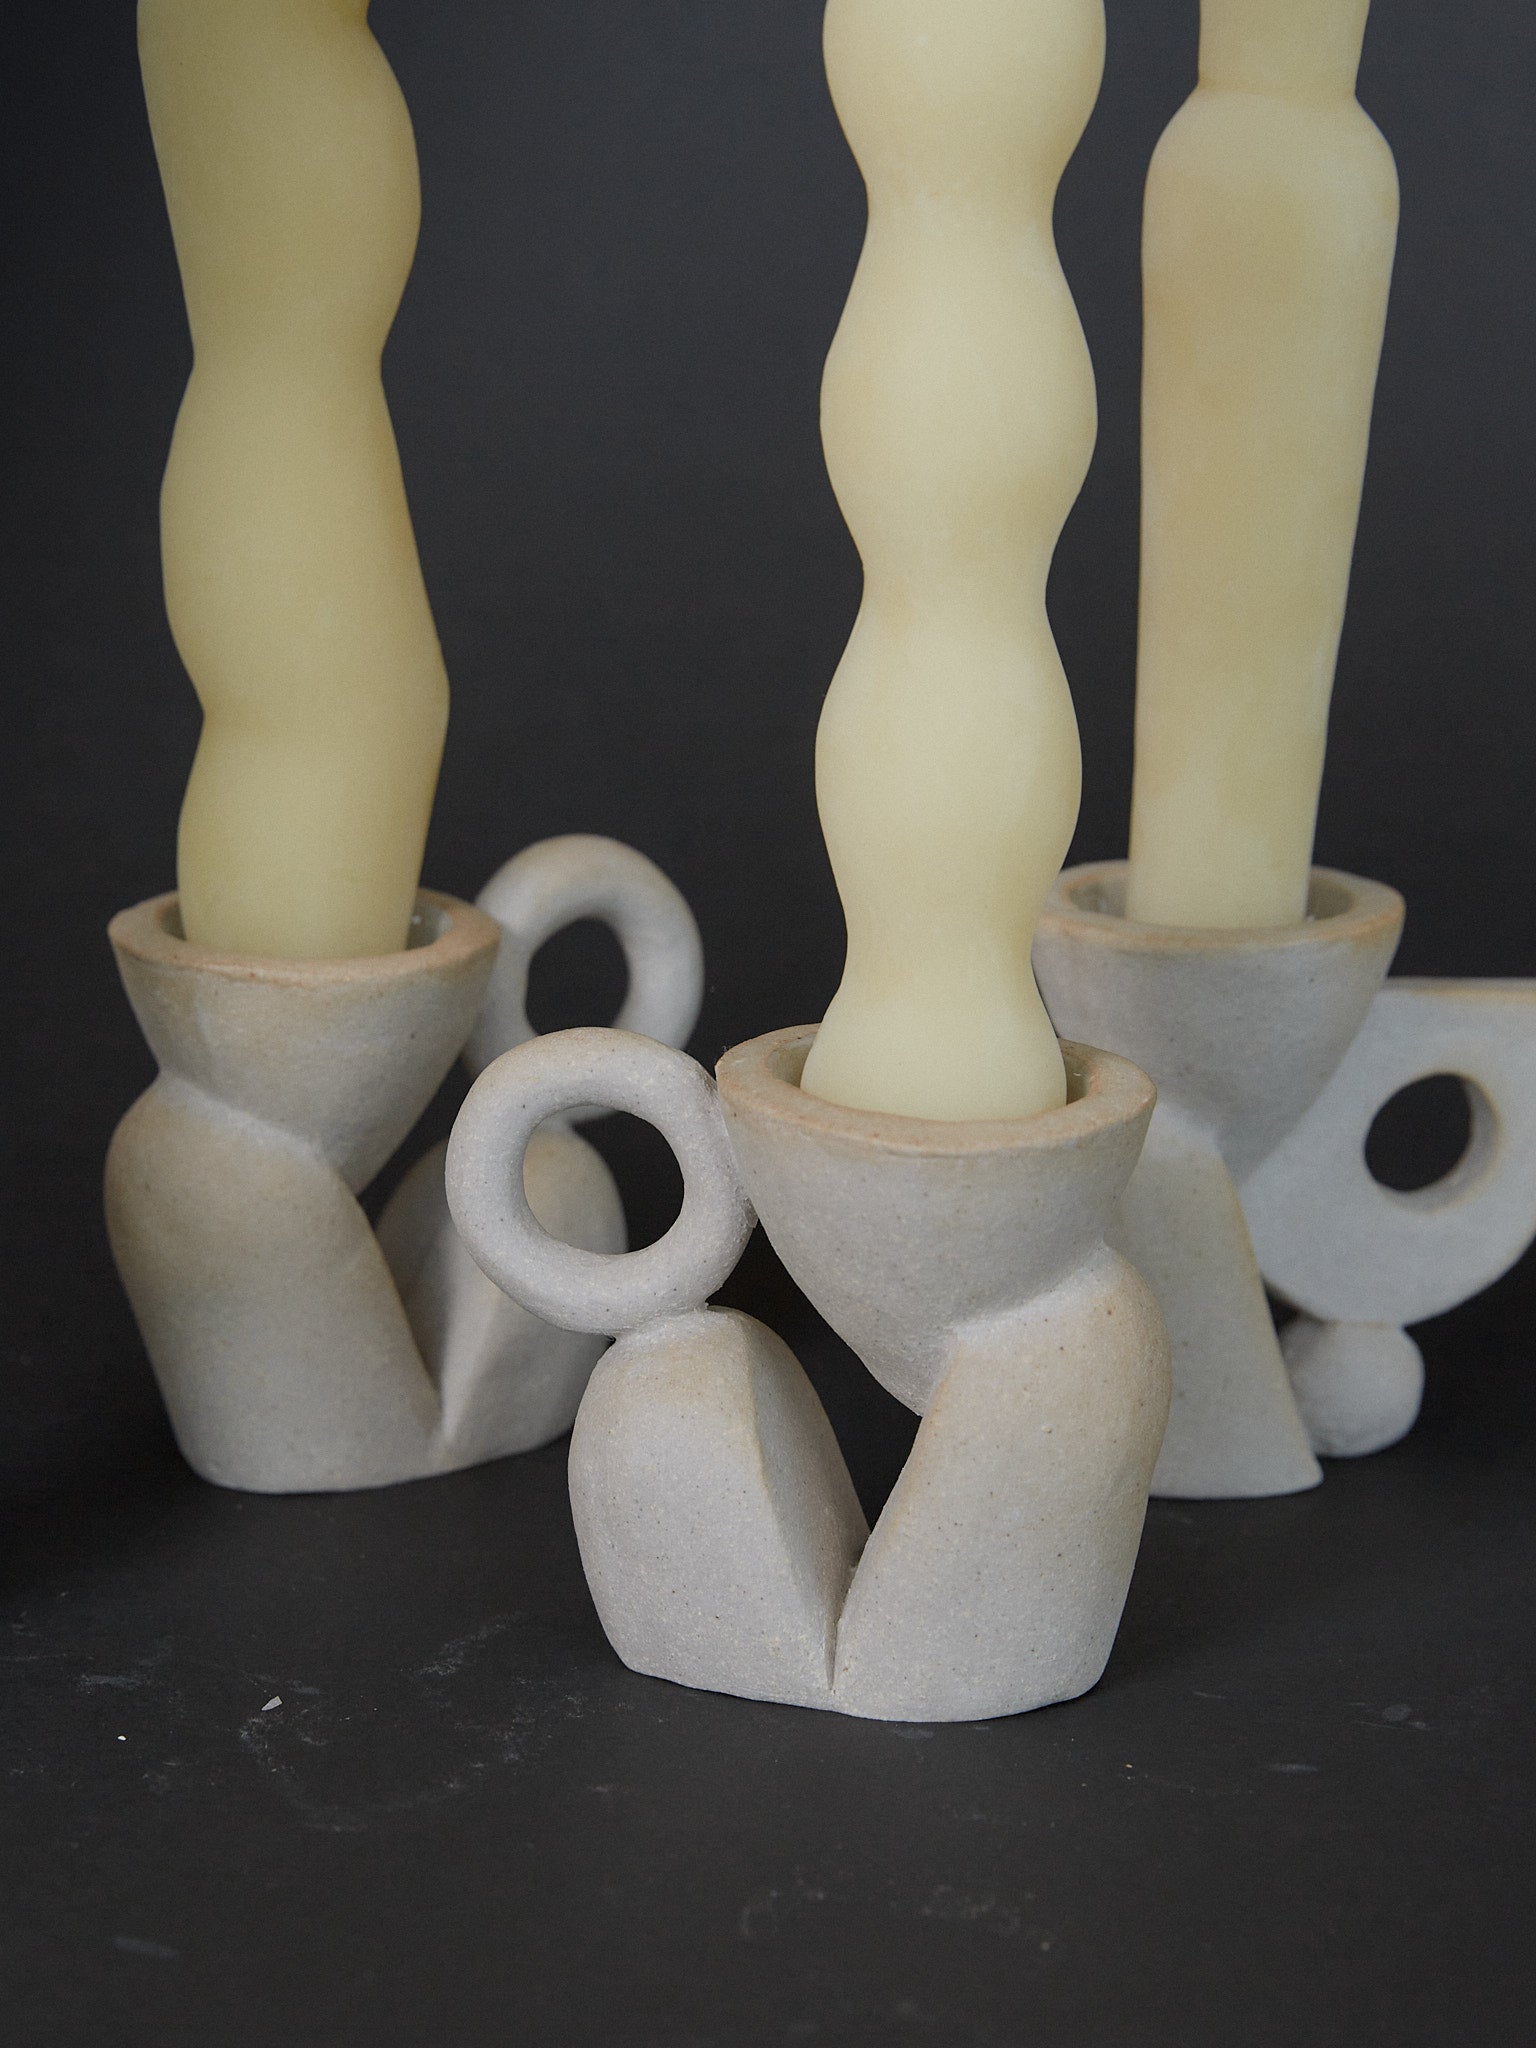 Bloom Candle Holder Pair. Sculptural abstract candleholders inspired by nature in natural grey ceramic stoneware. 